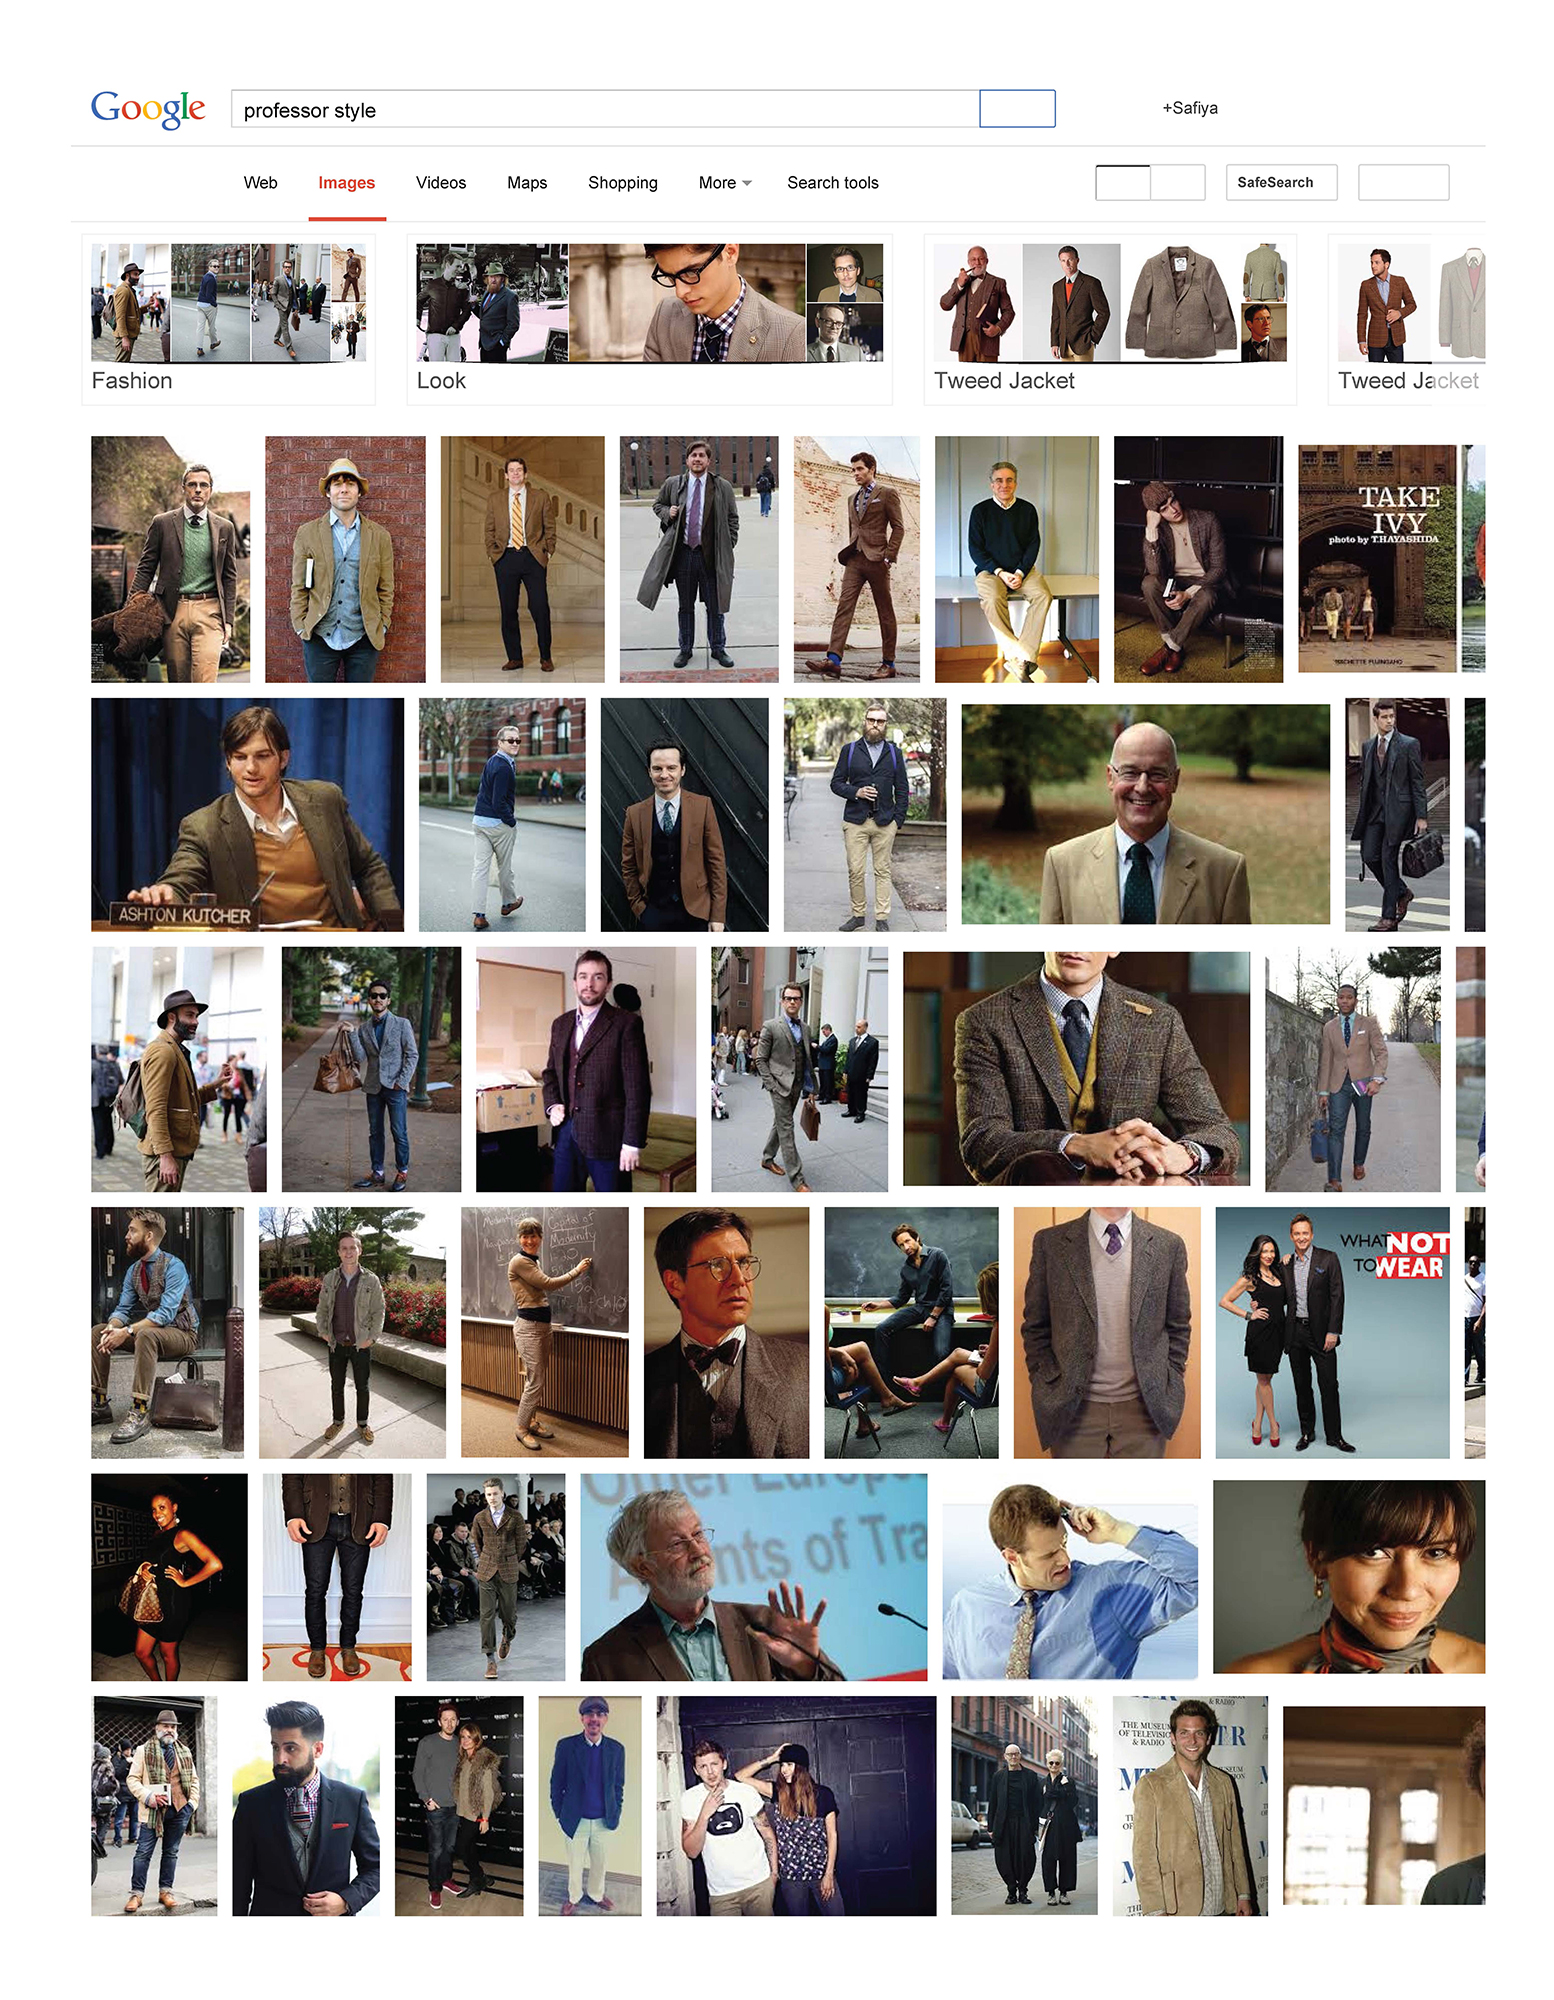 Google Images results when searching the phrase “professor style” while logged in as Safiya Noble, September 15, 2015.